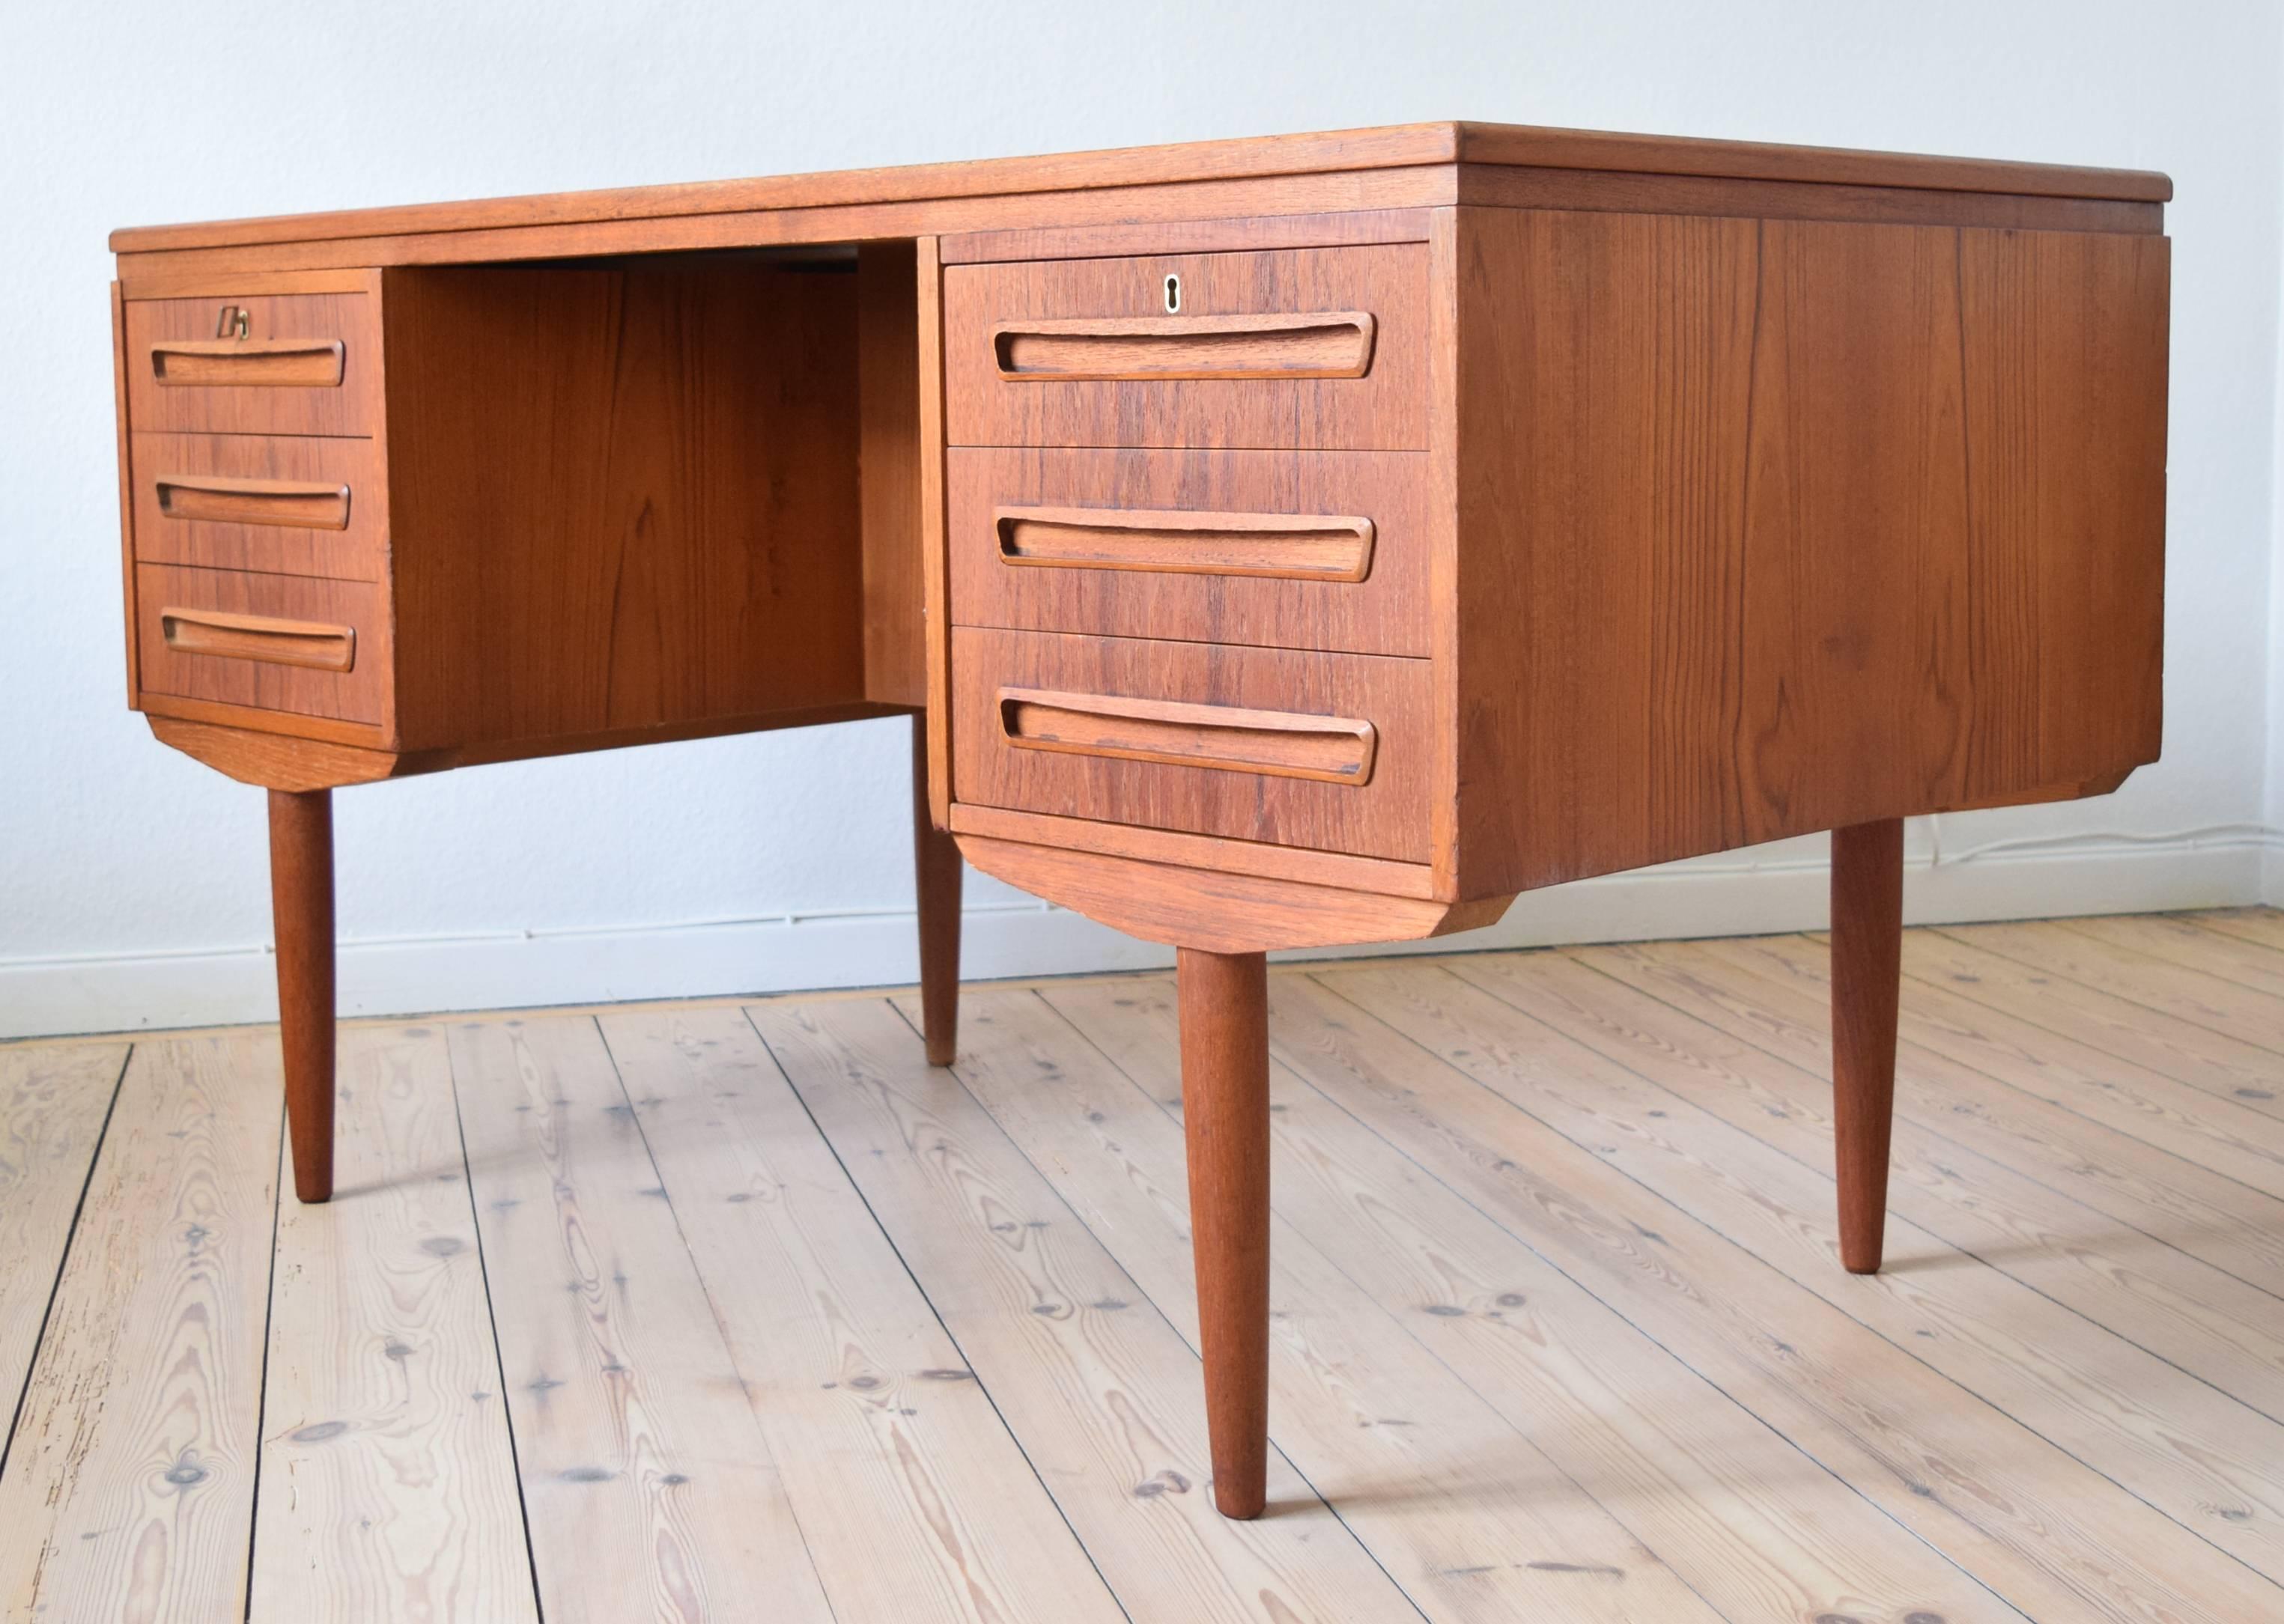 Teak desk designed by J. Svenstrup for A.P. Møbler, Denmark in the 1960s. Desk features six drawers (two lockable) on the front, and bar cabinet on the back side. Some small marks here and there commensurate with age and usage, but overall this